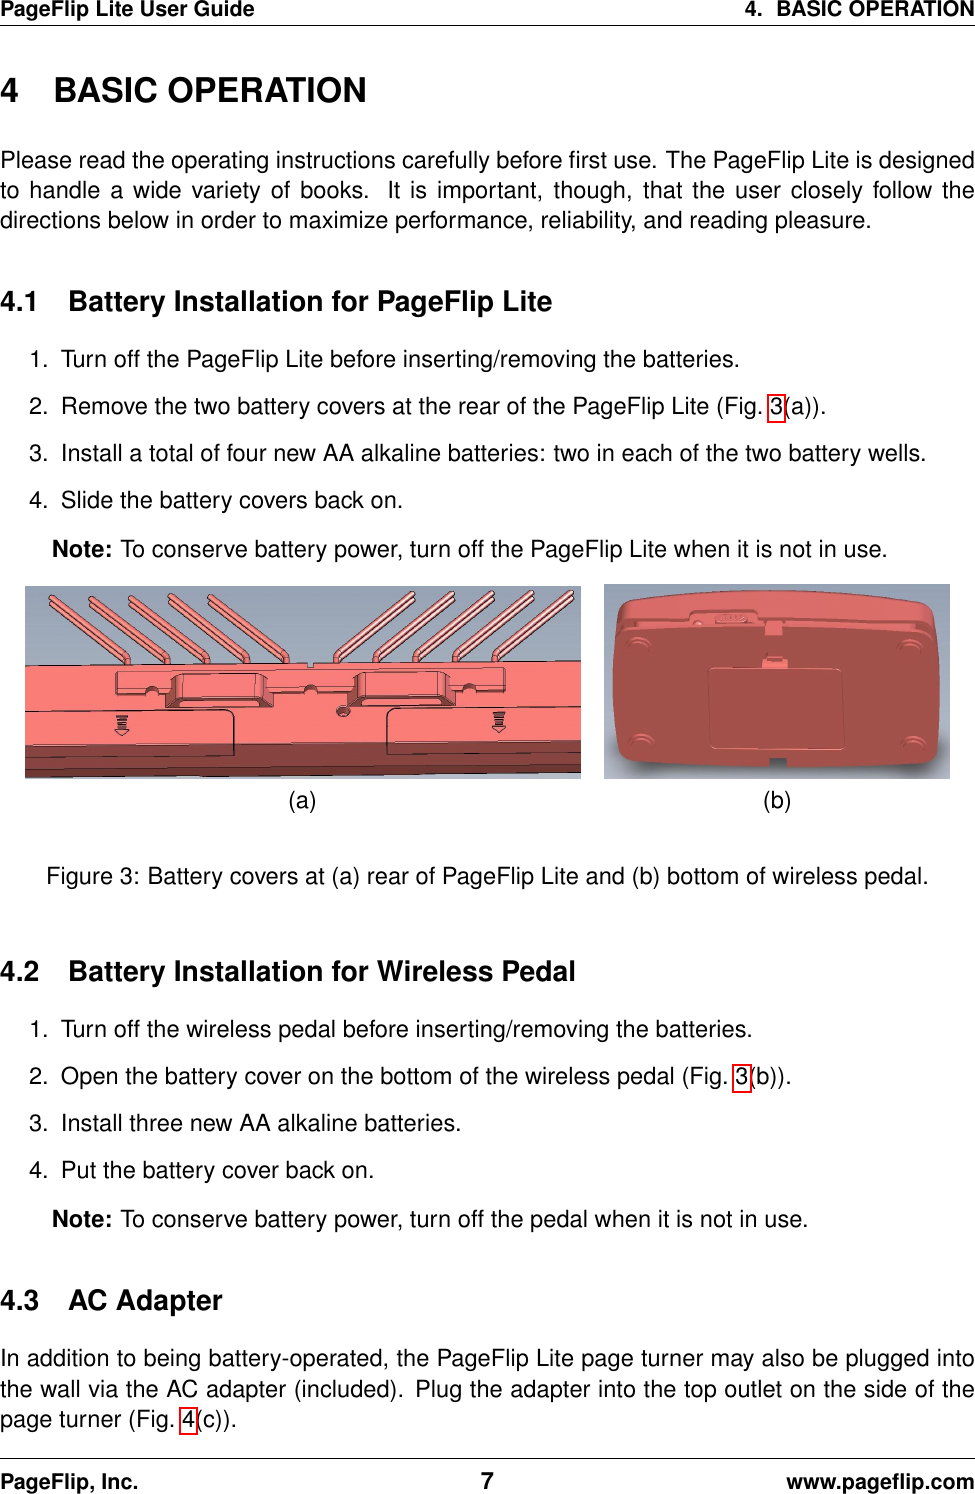 PageFlip Lite User Guide 4. BASIC OPERATION4 BASIC OPERATIONPlease read the operating instructions carefully before ﬁrst use. The PageFlip Lite is designedto handle a wide variety of books. It is important, though, that the user closely follow thedirections below in order to maximize performance, reliability, and reading pleasure.4.1 Battery Installation for PageFlip Lite1. Turn off the PageFlip Lite before inserting/removing the batteries.2. Remove the two battery covers at the rear of the PageFlip Lite (Fig. 3(a)).3. Install a total of four new AA alkaline batteries: two in each of the two battery wells.4. Slide the battery covers back on.Note: To conserve battery power, turn off the PageFlip Lite when it is not in use.(a) (b)Figure 3: Battery covers at (a) rear of PageFlip Lite and (b) bottom of wireless pedal.4.2 Battery Installation for Wireless Pedal1. Turn off the wireless pedal before inserting/removing the batteries.2. Open the battery cover on the bottom of the wireless pedal (Fig. 3(b)).3. Install three new AA alkaline batteries.4. Put the battery cover back on.Note: To conserve battery power, turn off the pedal when it is not in use.4.3 AC AdapterIn addition to being battery-operated, the PageFlip Lite page turner may also be plugged intothe wall via the AC adapter (included). Plug the adapter into the top outlet on the side of thepage turner (Fig. 4(c)).PageFlip, Inc. 7www.pageﬂip.com